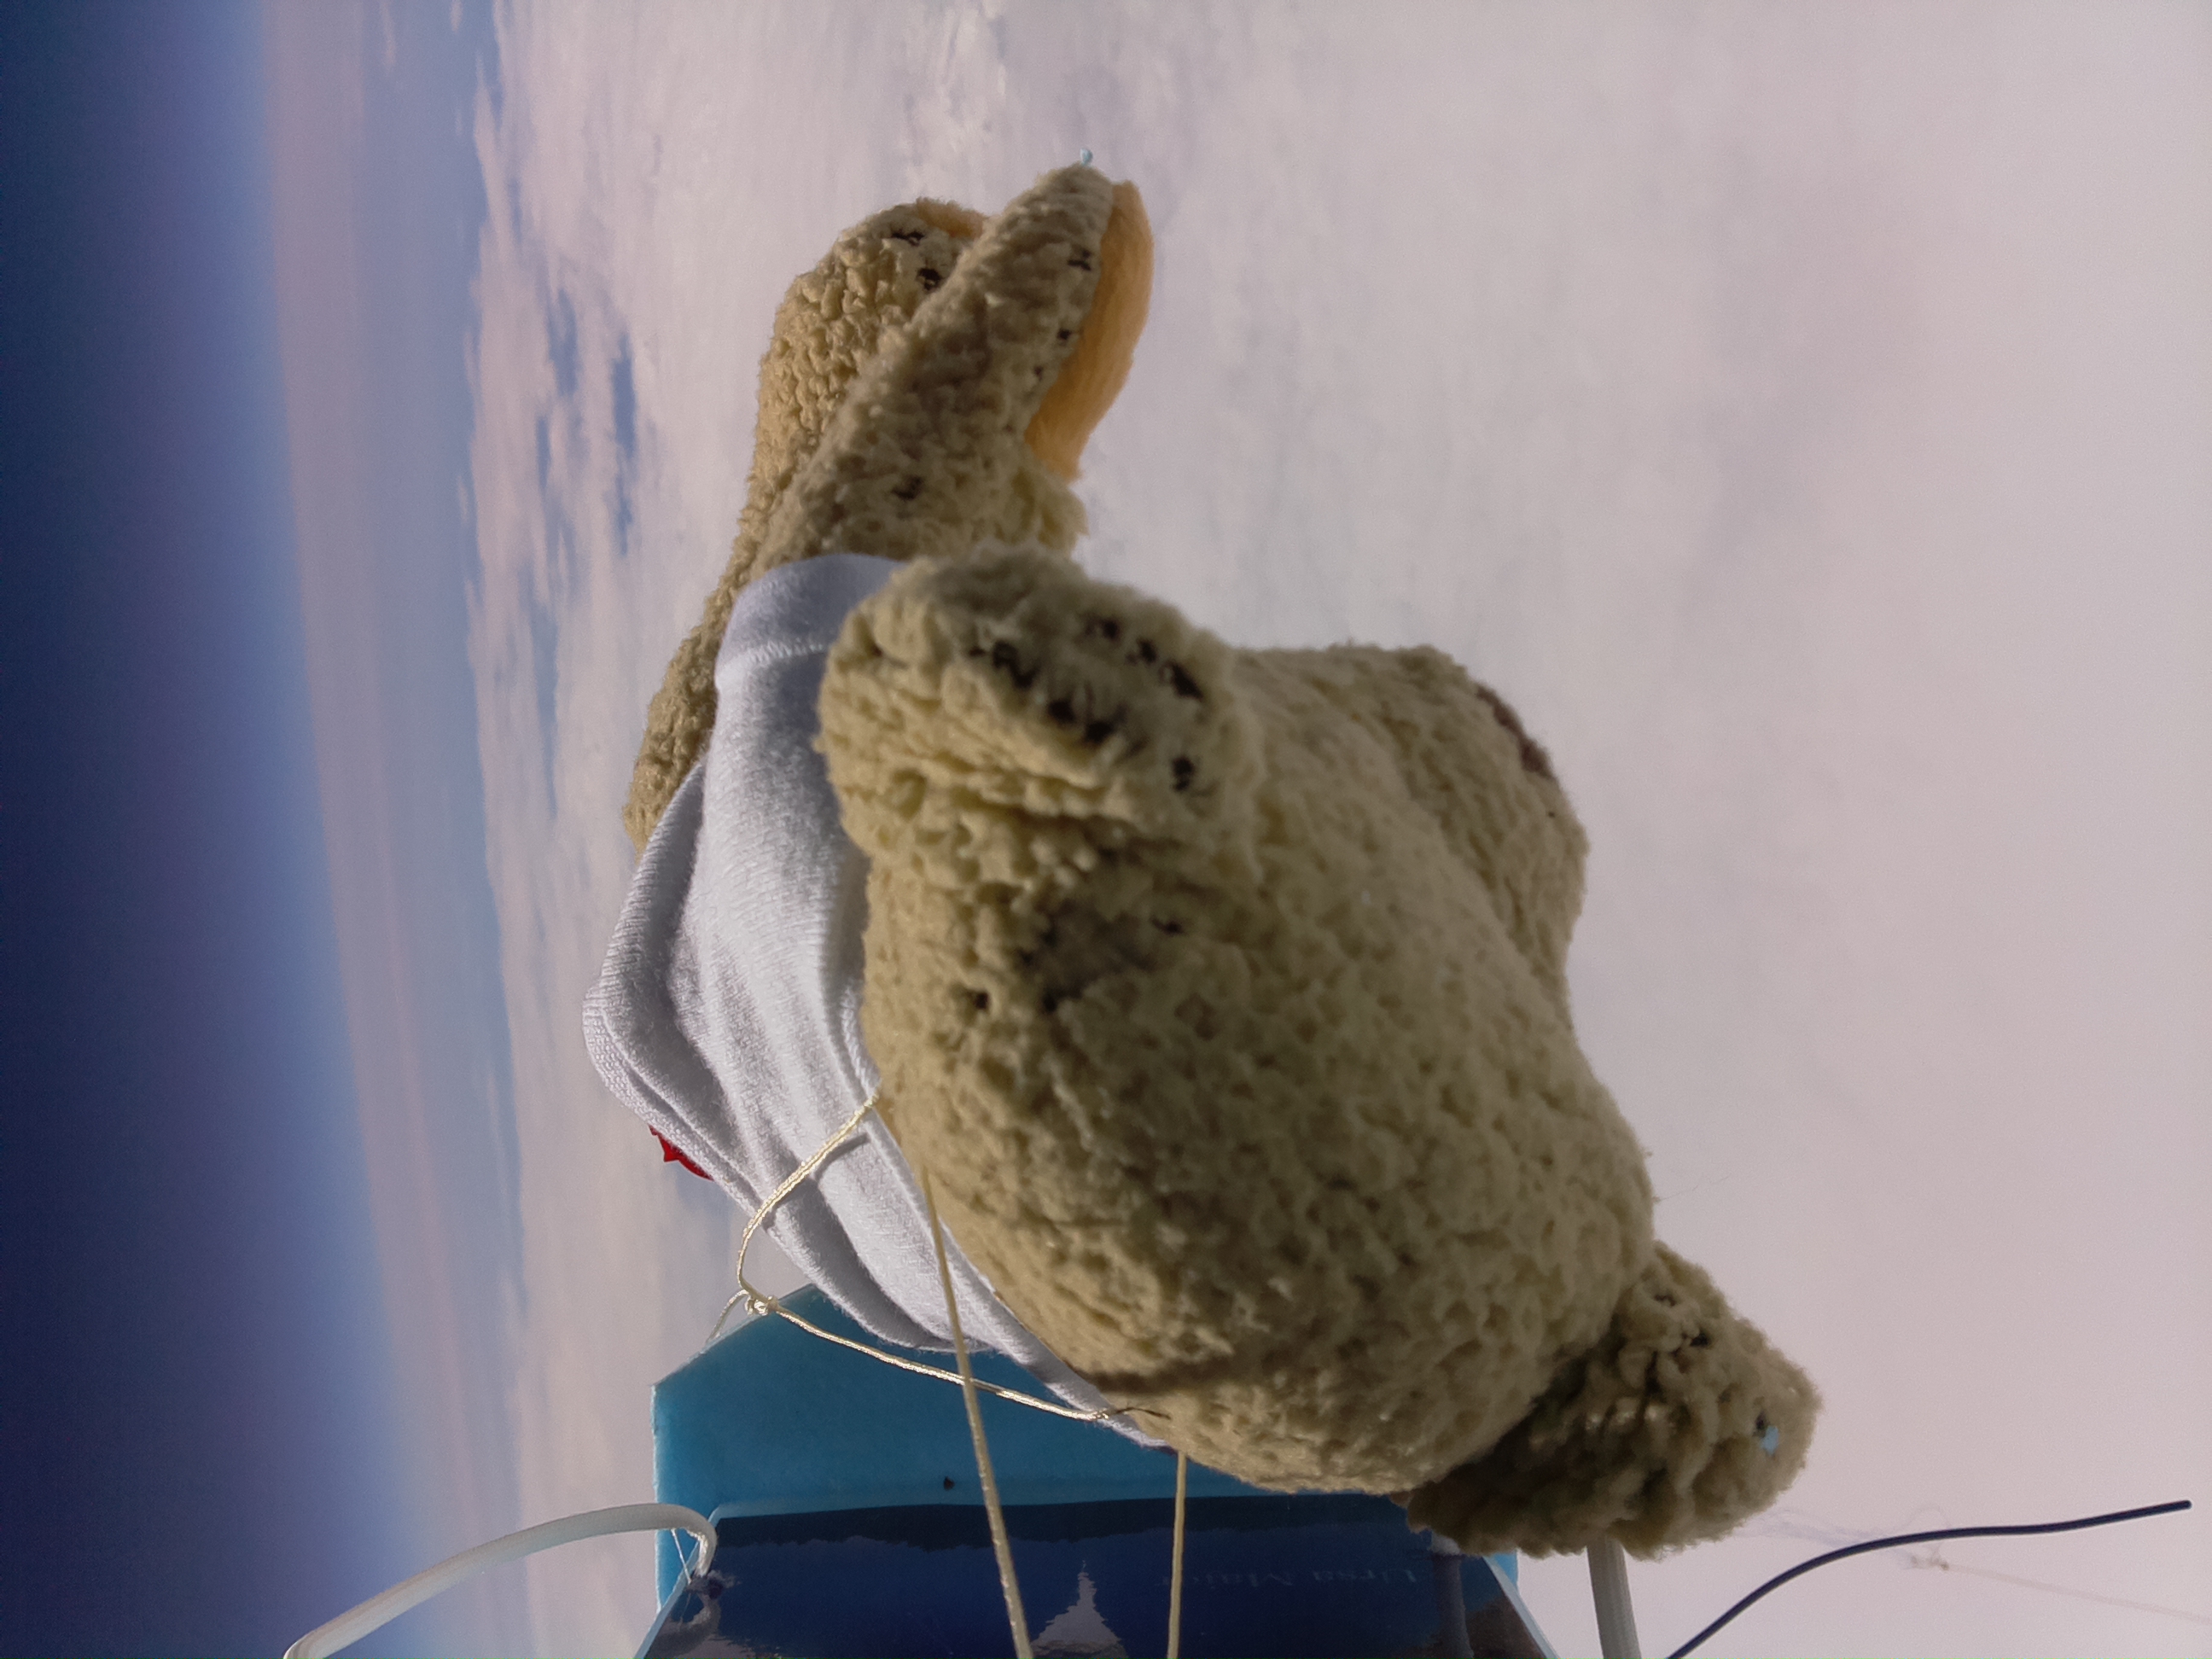 Geek insider, geekinsider, geekinsider. Com,, baumgartner beaten by a teddy bear and raspberry pi! , living